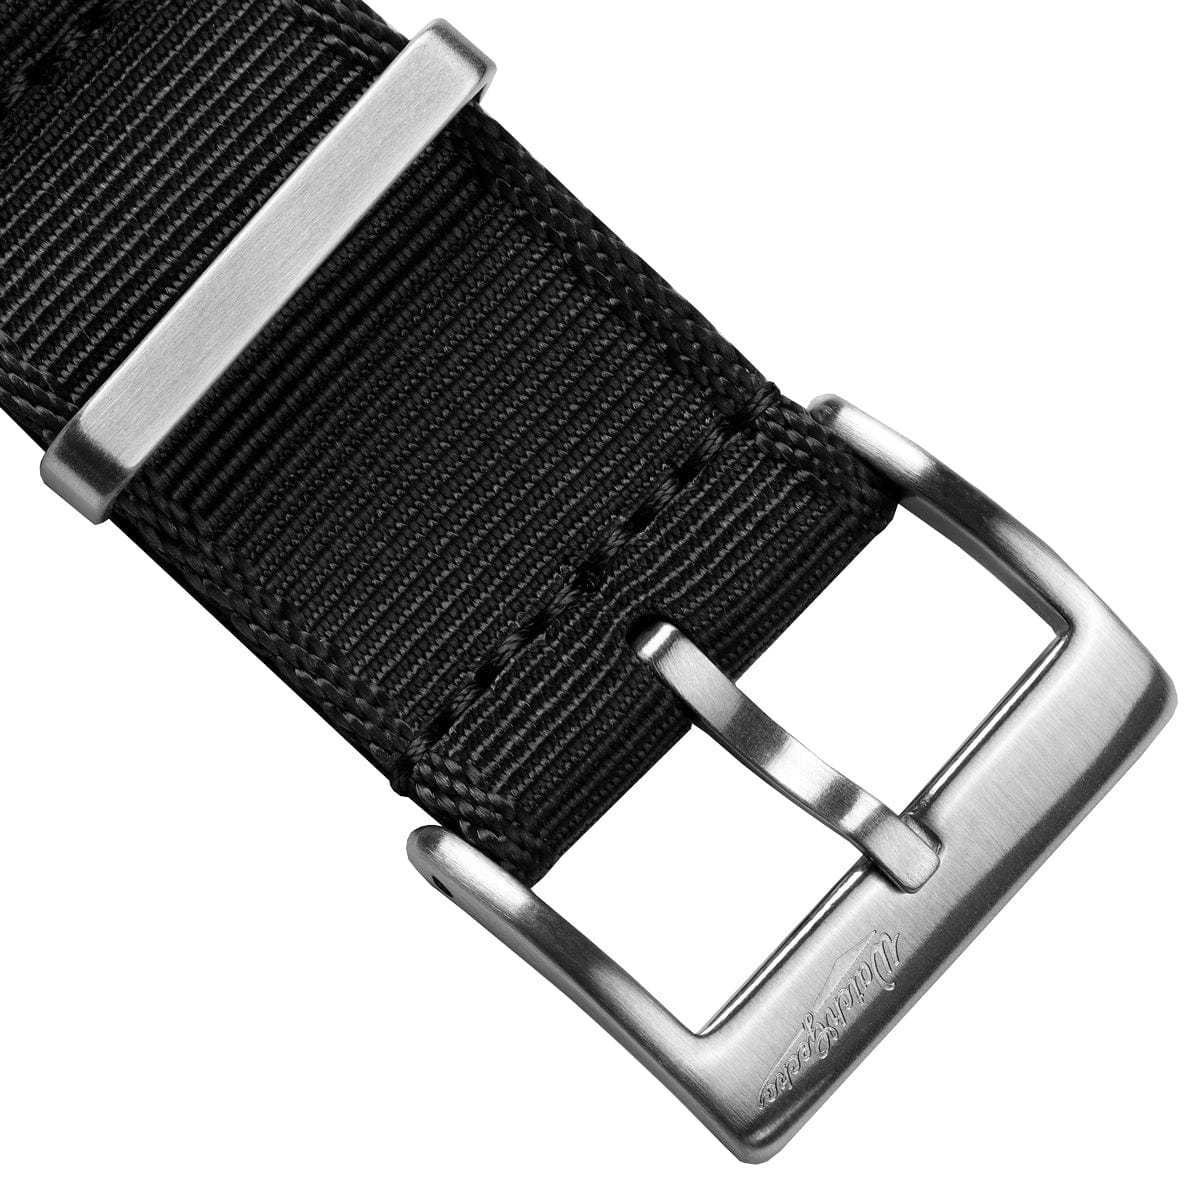 Black Leather Strap with Leather Woven Through - 3/4 inch (19mm